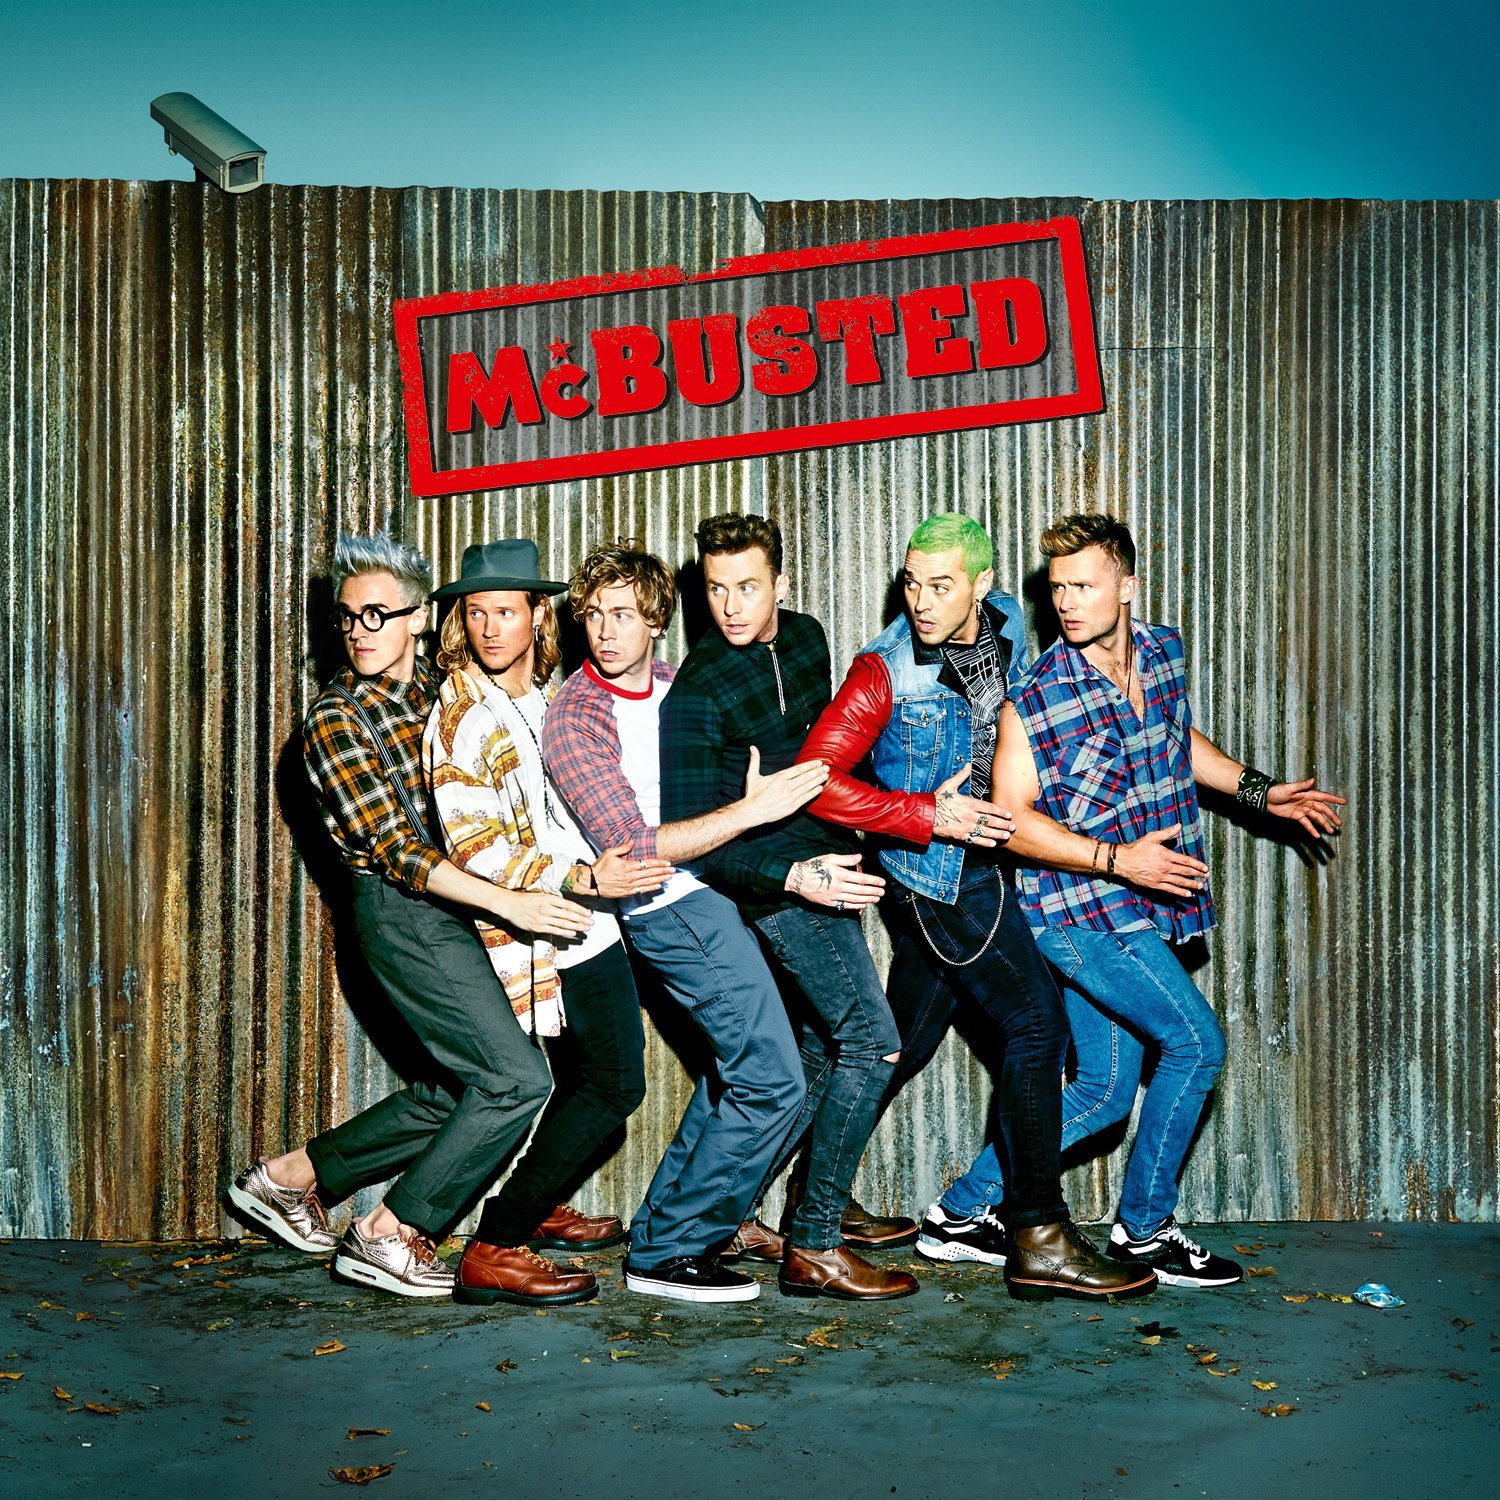 McBusted - McBusted (Music CD)